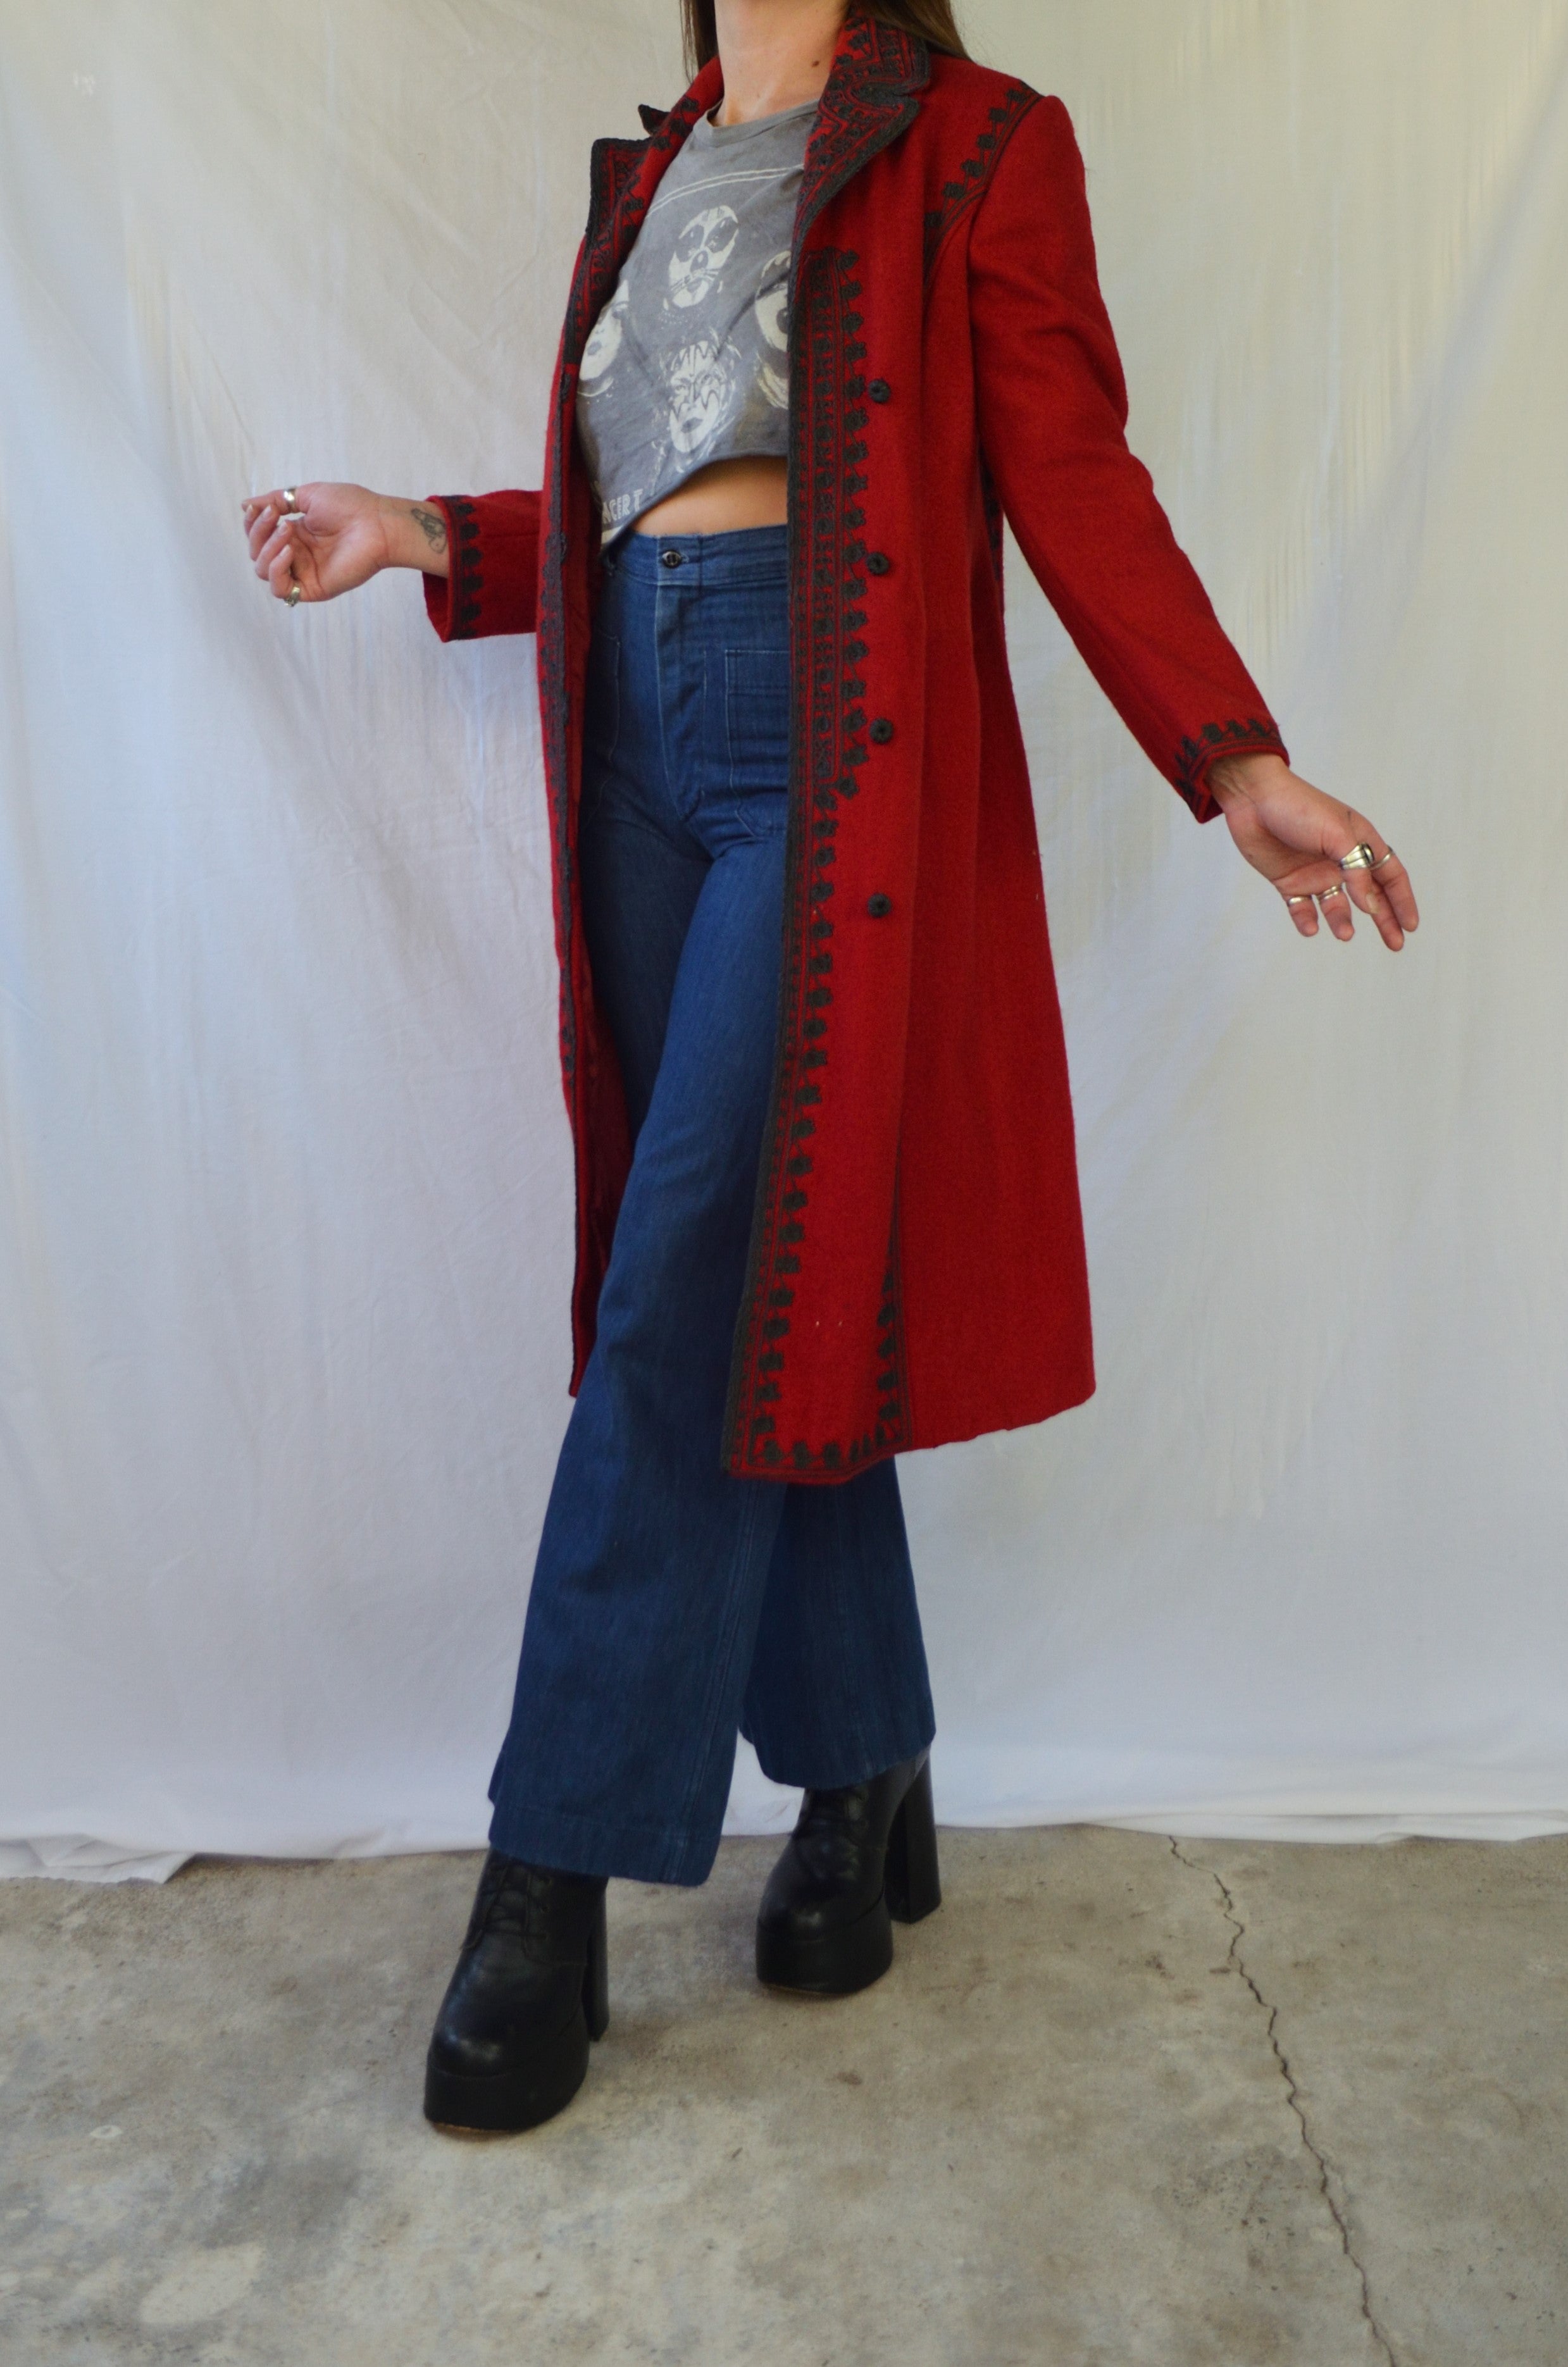 Vintage Red Wool Embroidered Trench Coat